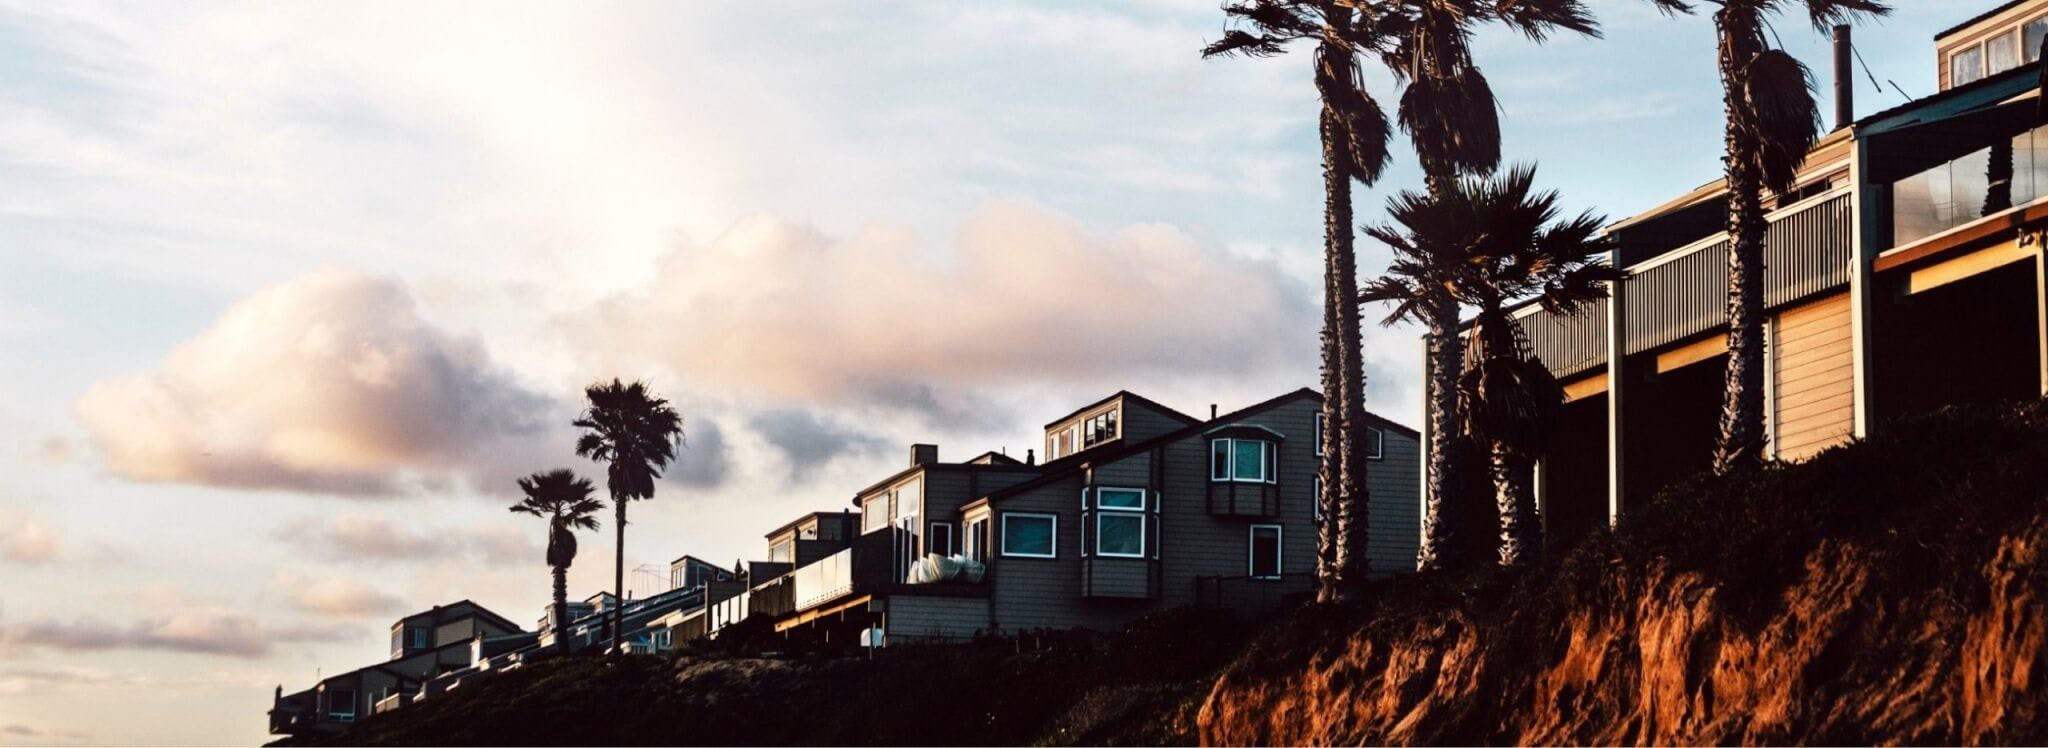 California homes on cliff